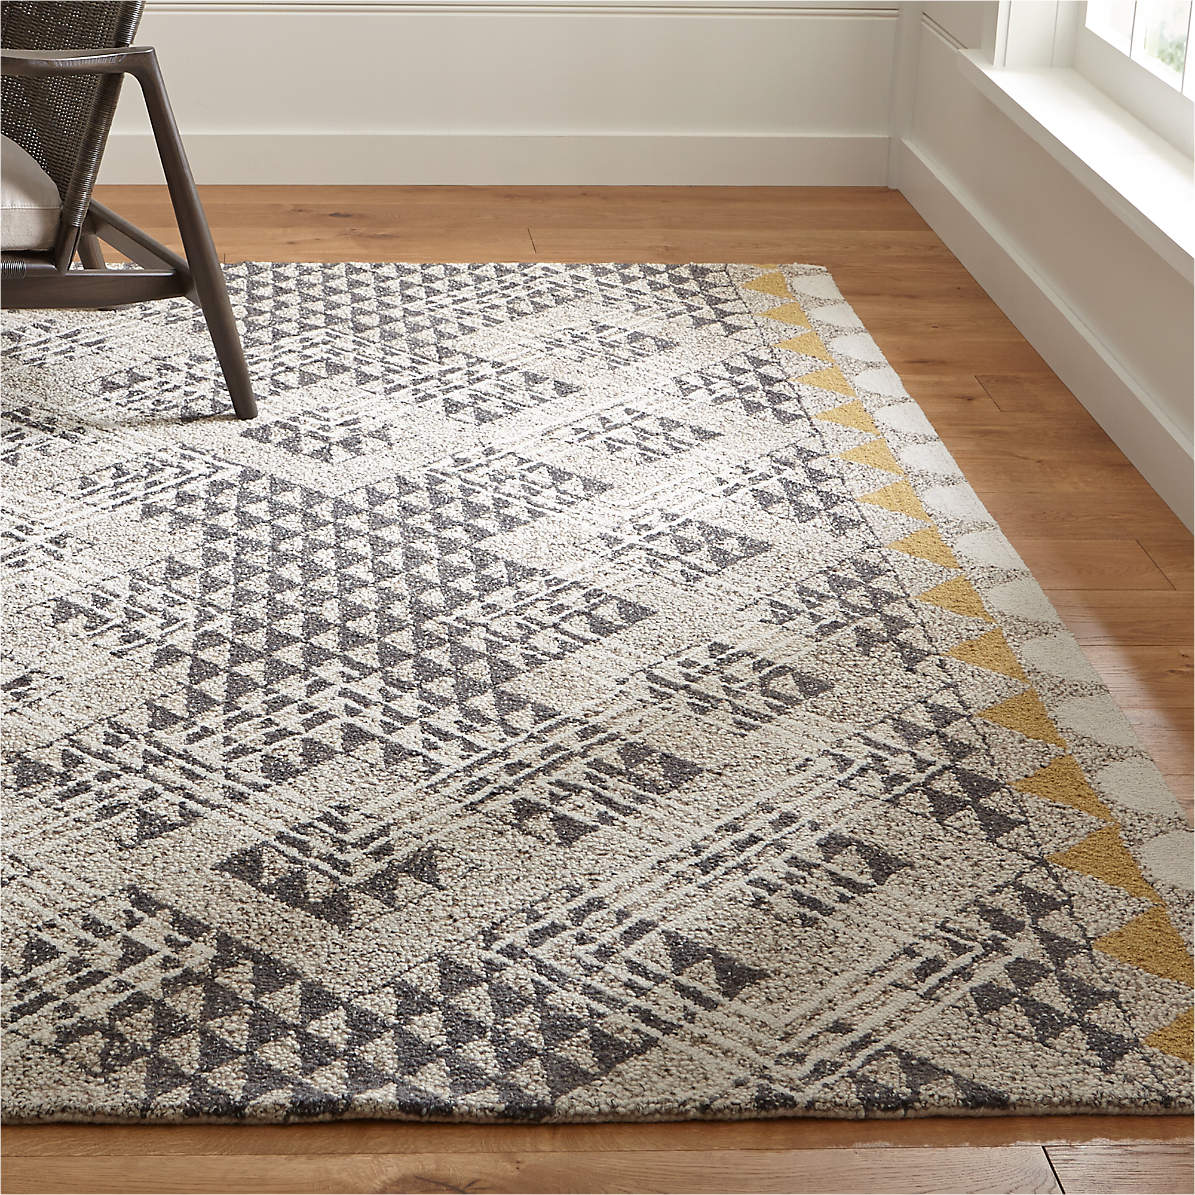 Thea Hand Hooked Wool Rug Crate And, Crate And Barrel Rugs